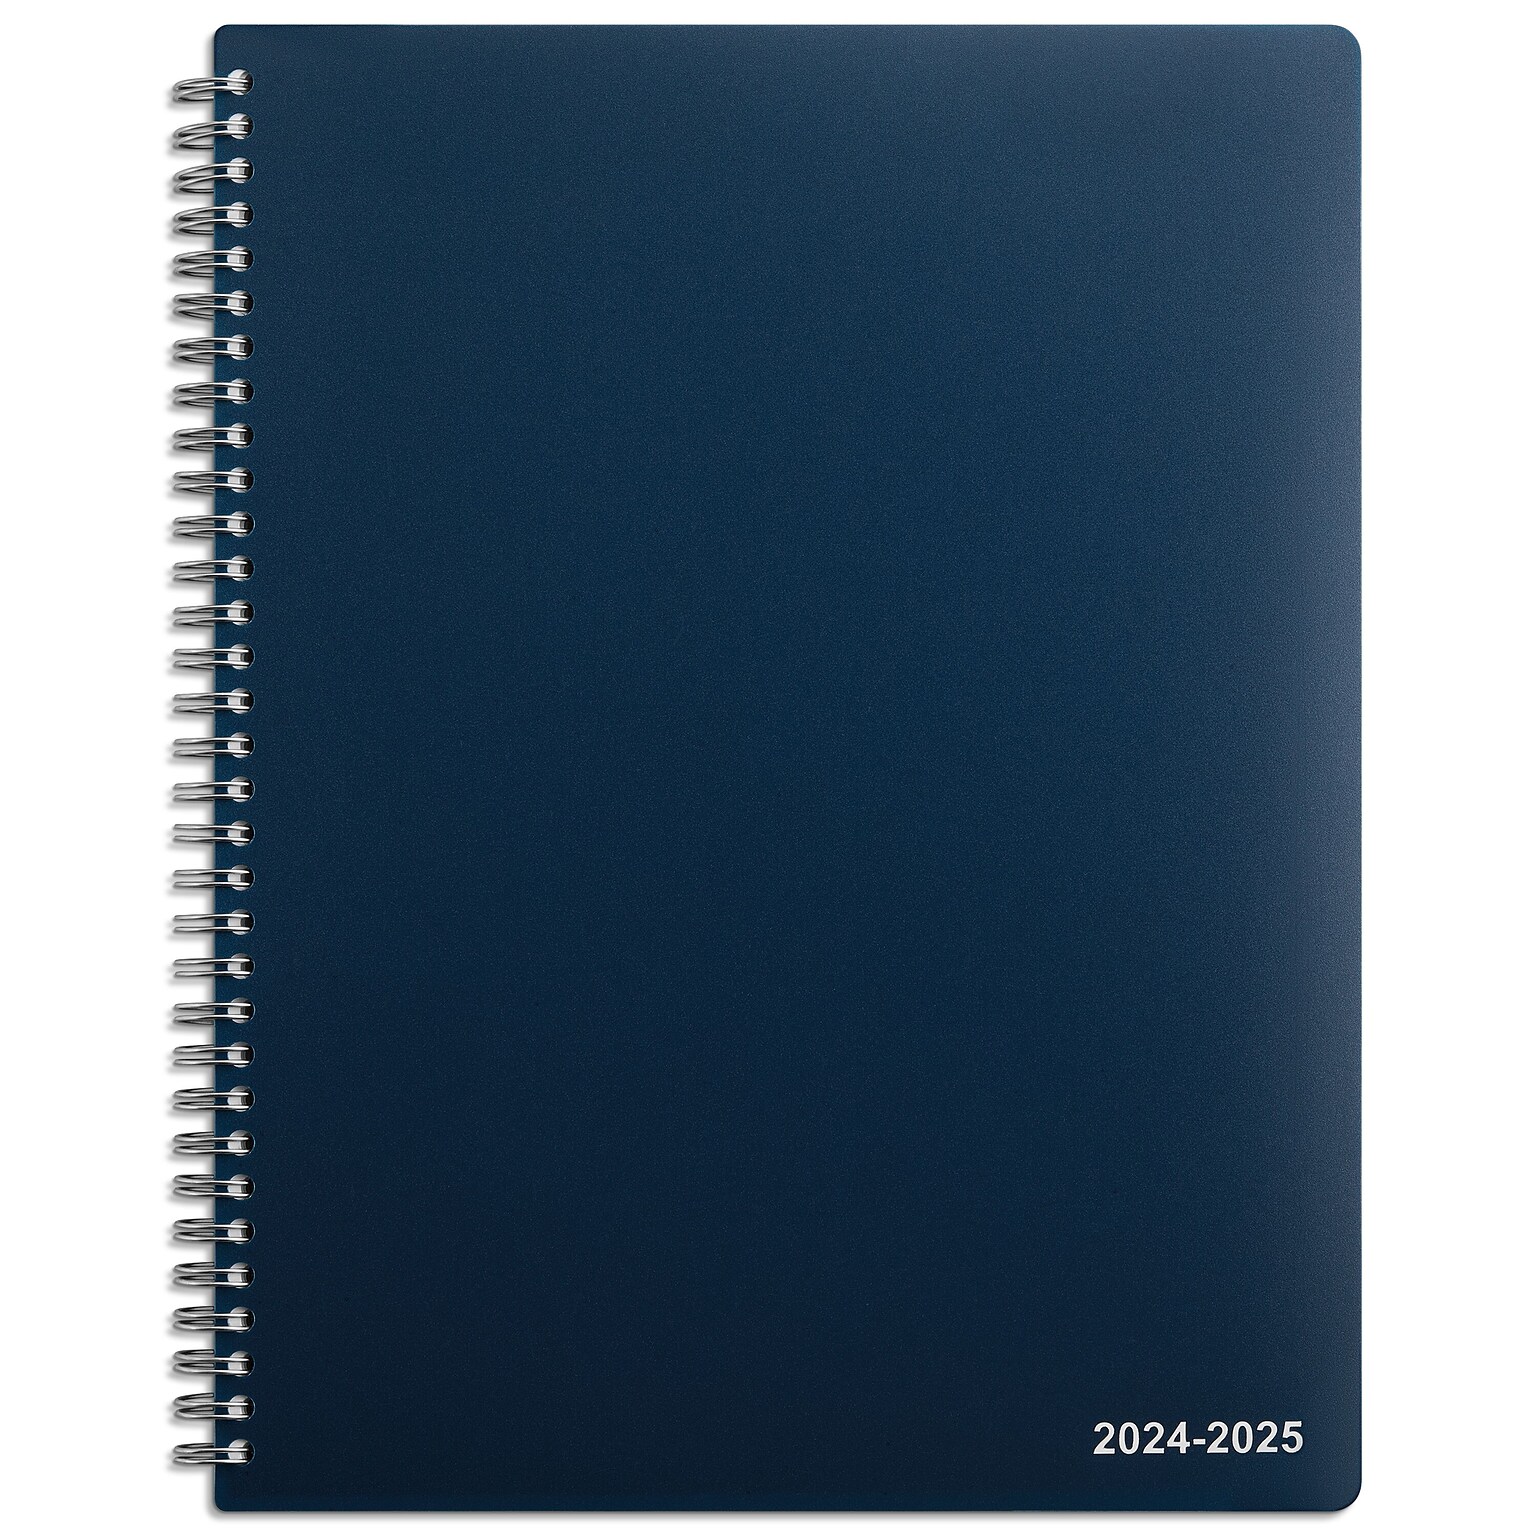 2024-2025 Staples 8 x 11 Academic Weekly & Monthly Appointment Book, Plastic Cover, Navy (ST60358-23)